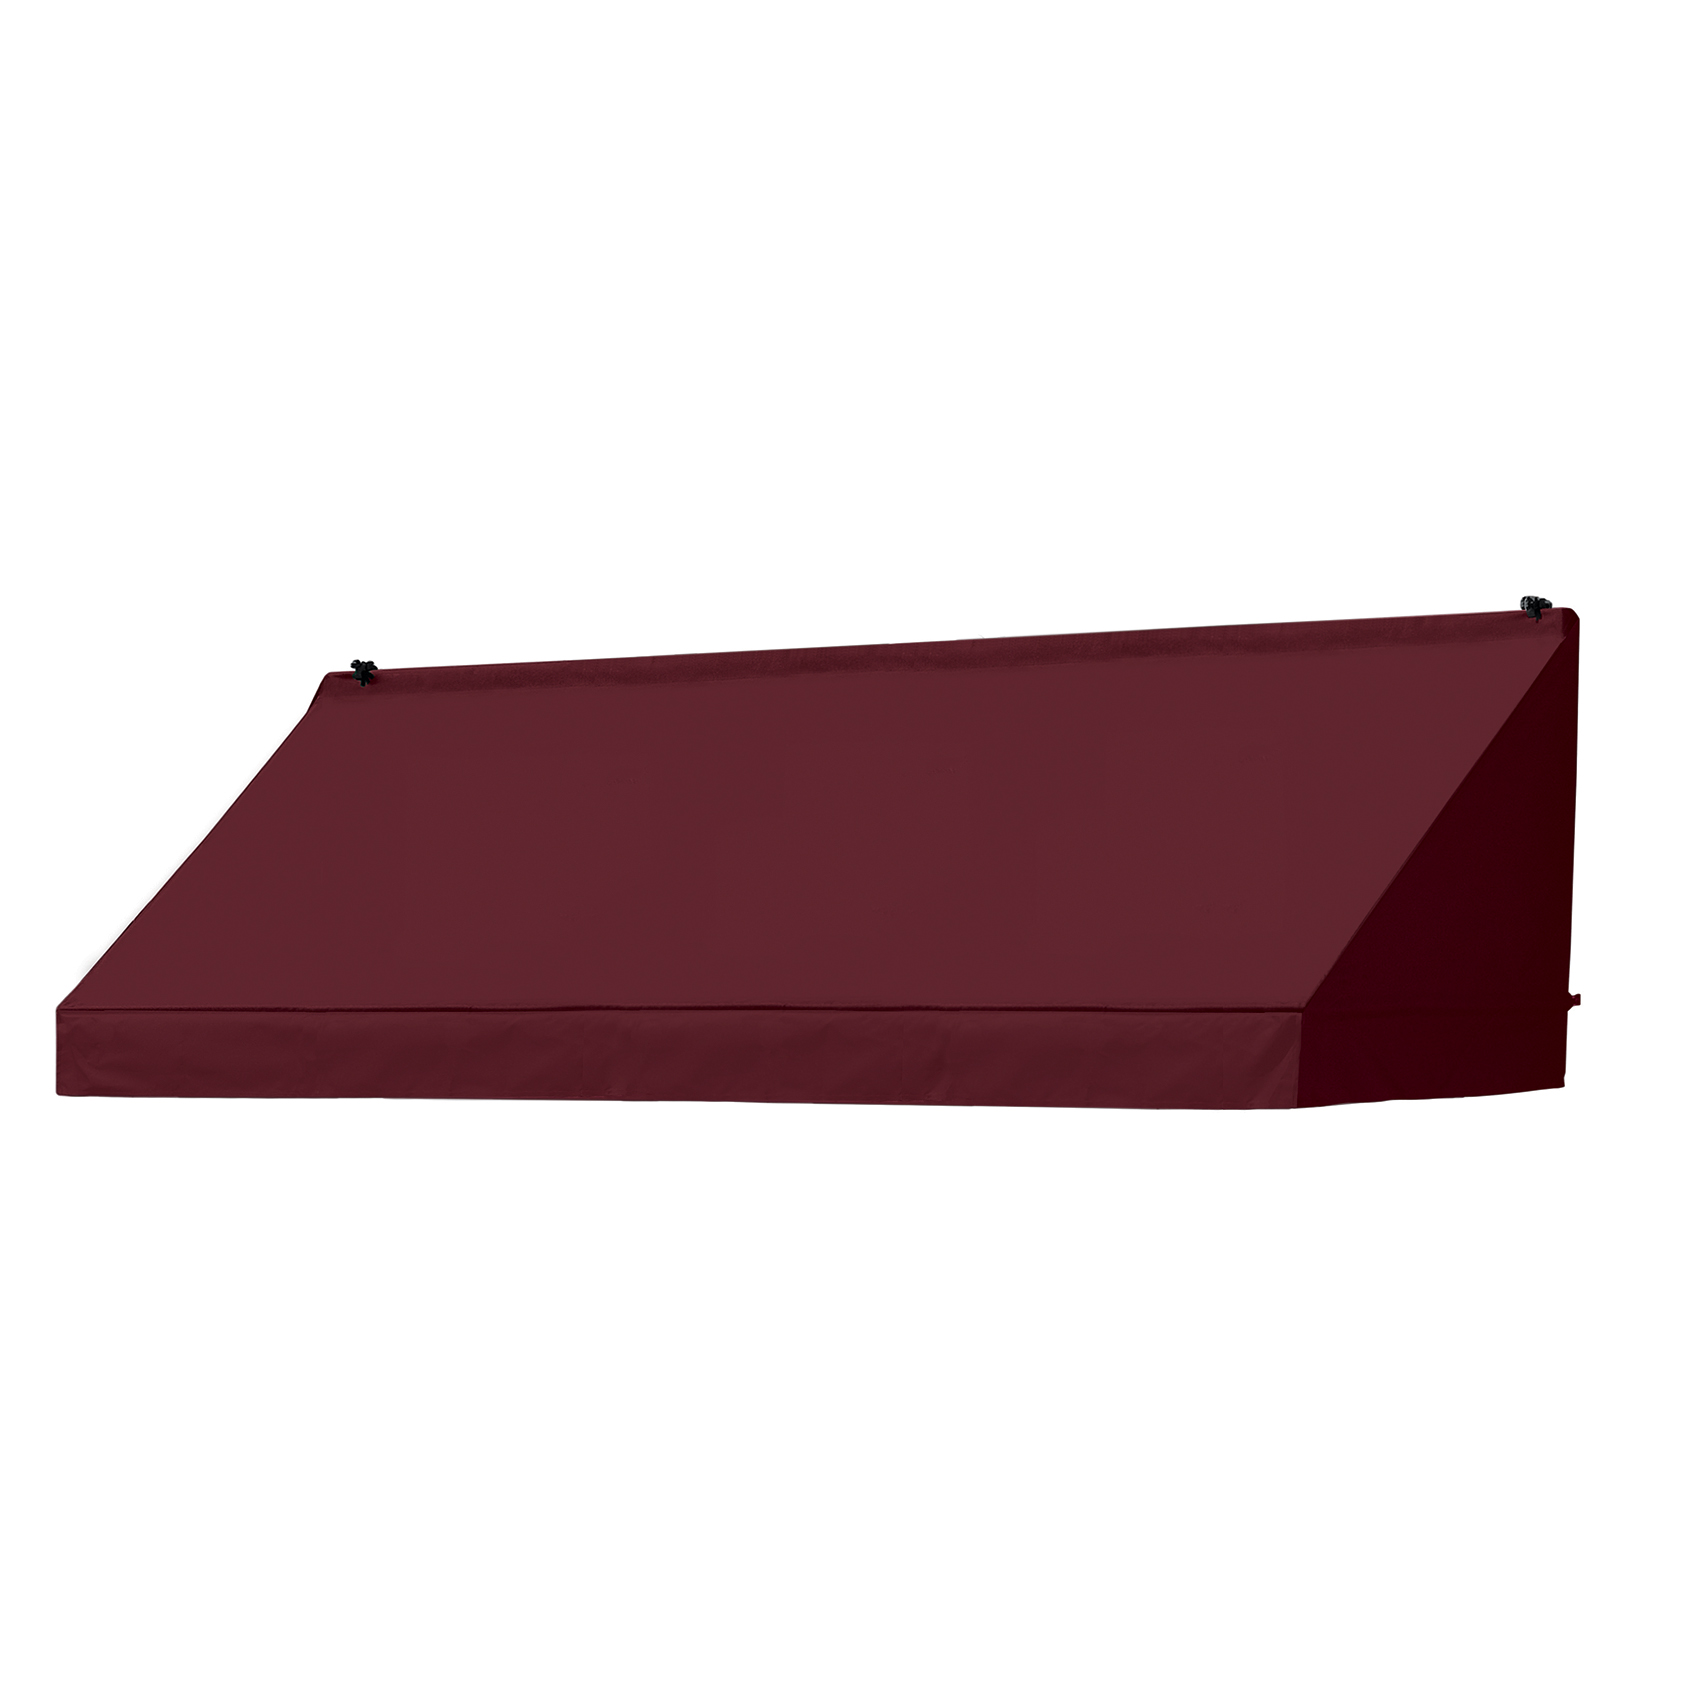 Awnings in a Box&reg; 6' Classic Style Awning Replacement Cover in Assorted Colors